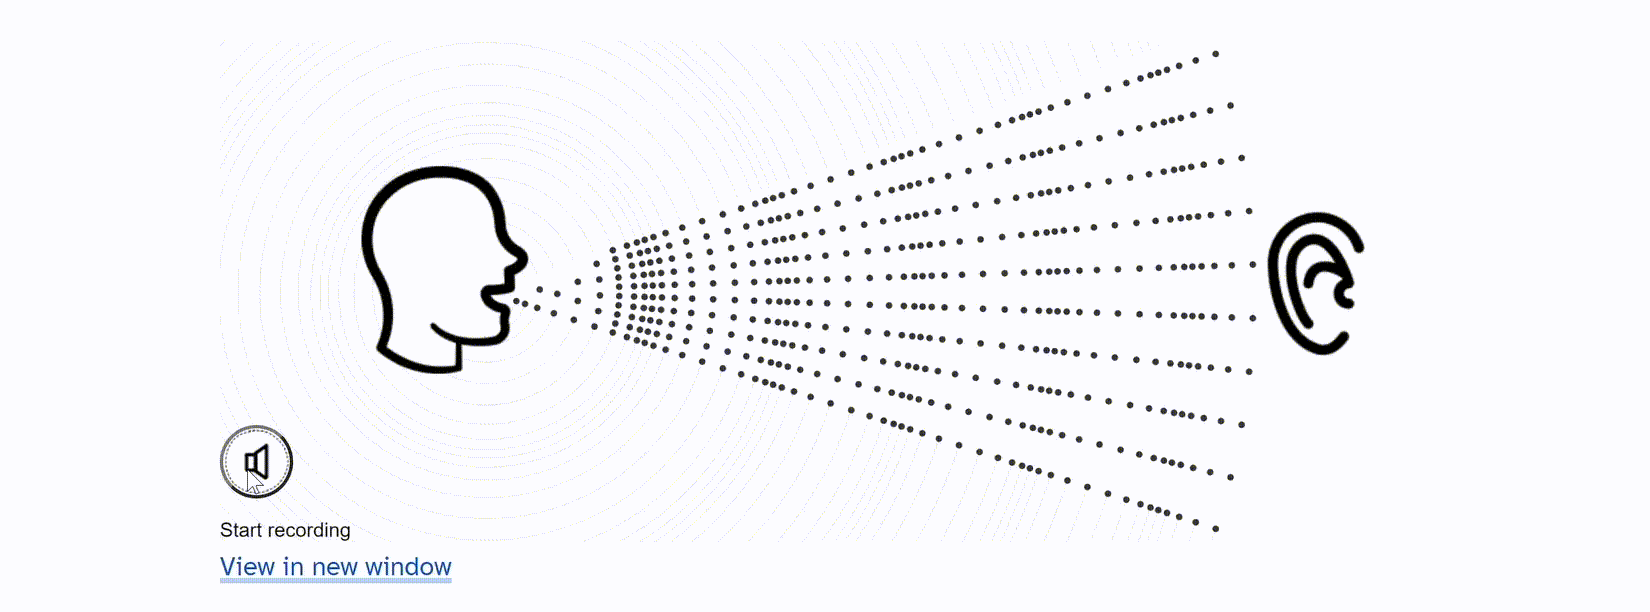 An animated GIF of an interactive animation to demonstrate how sound travels though the air.